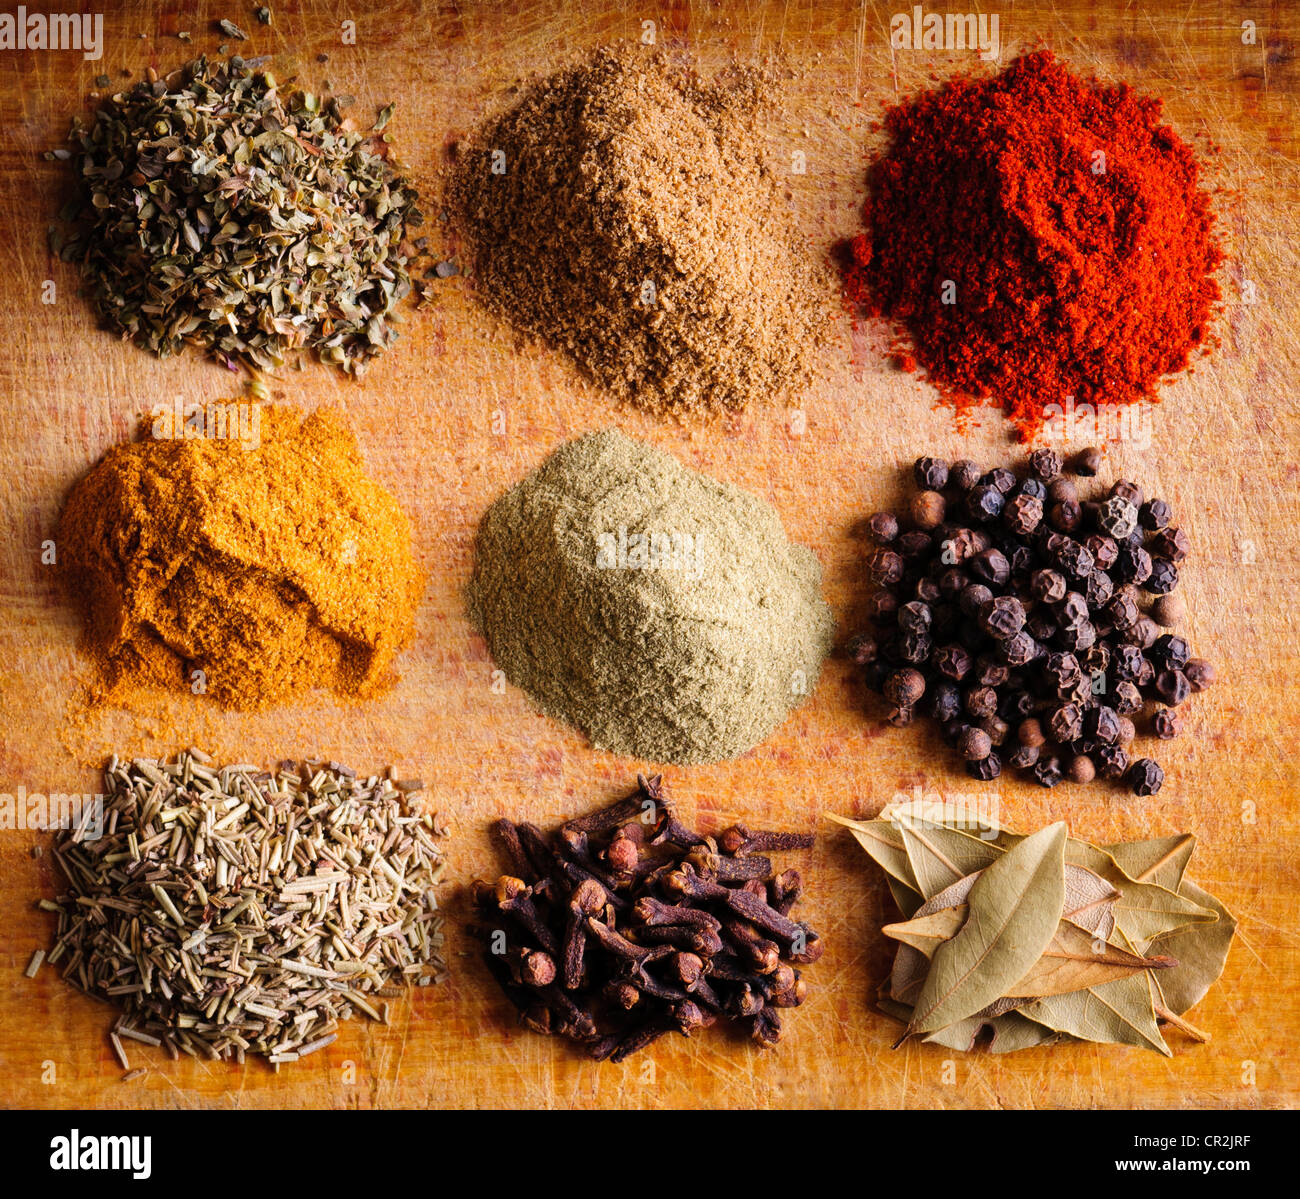 Background with different color spices Stock Photo